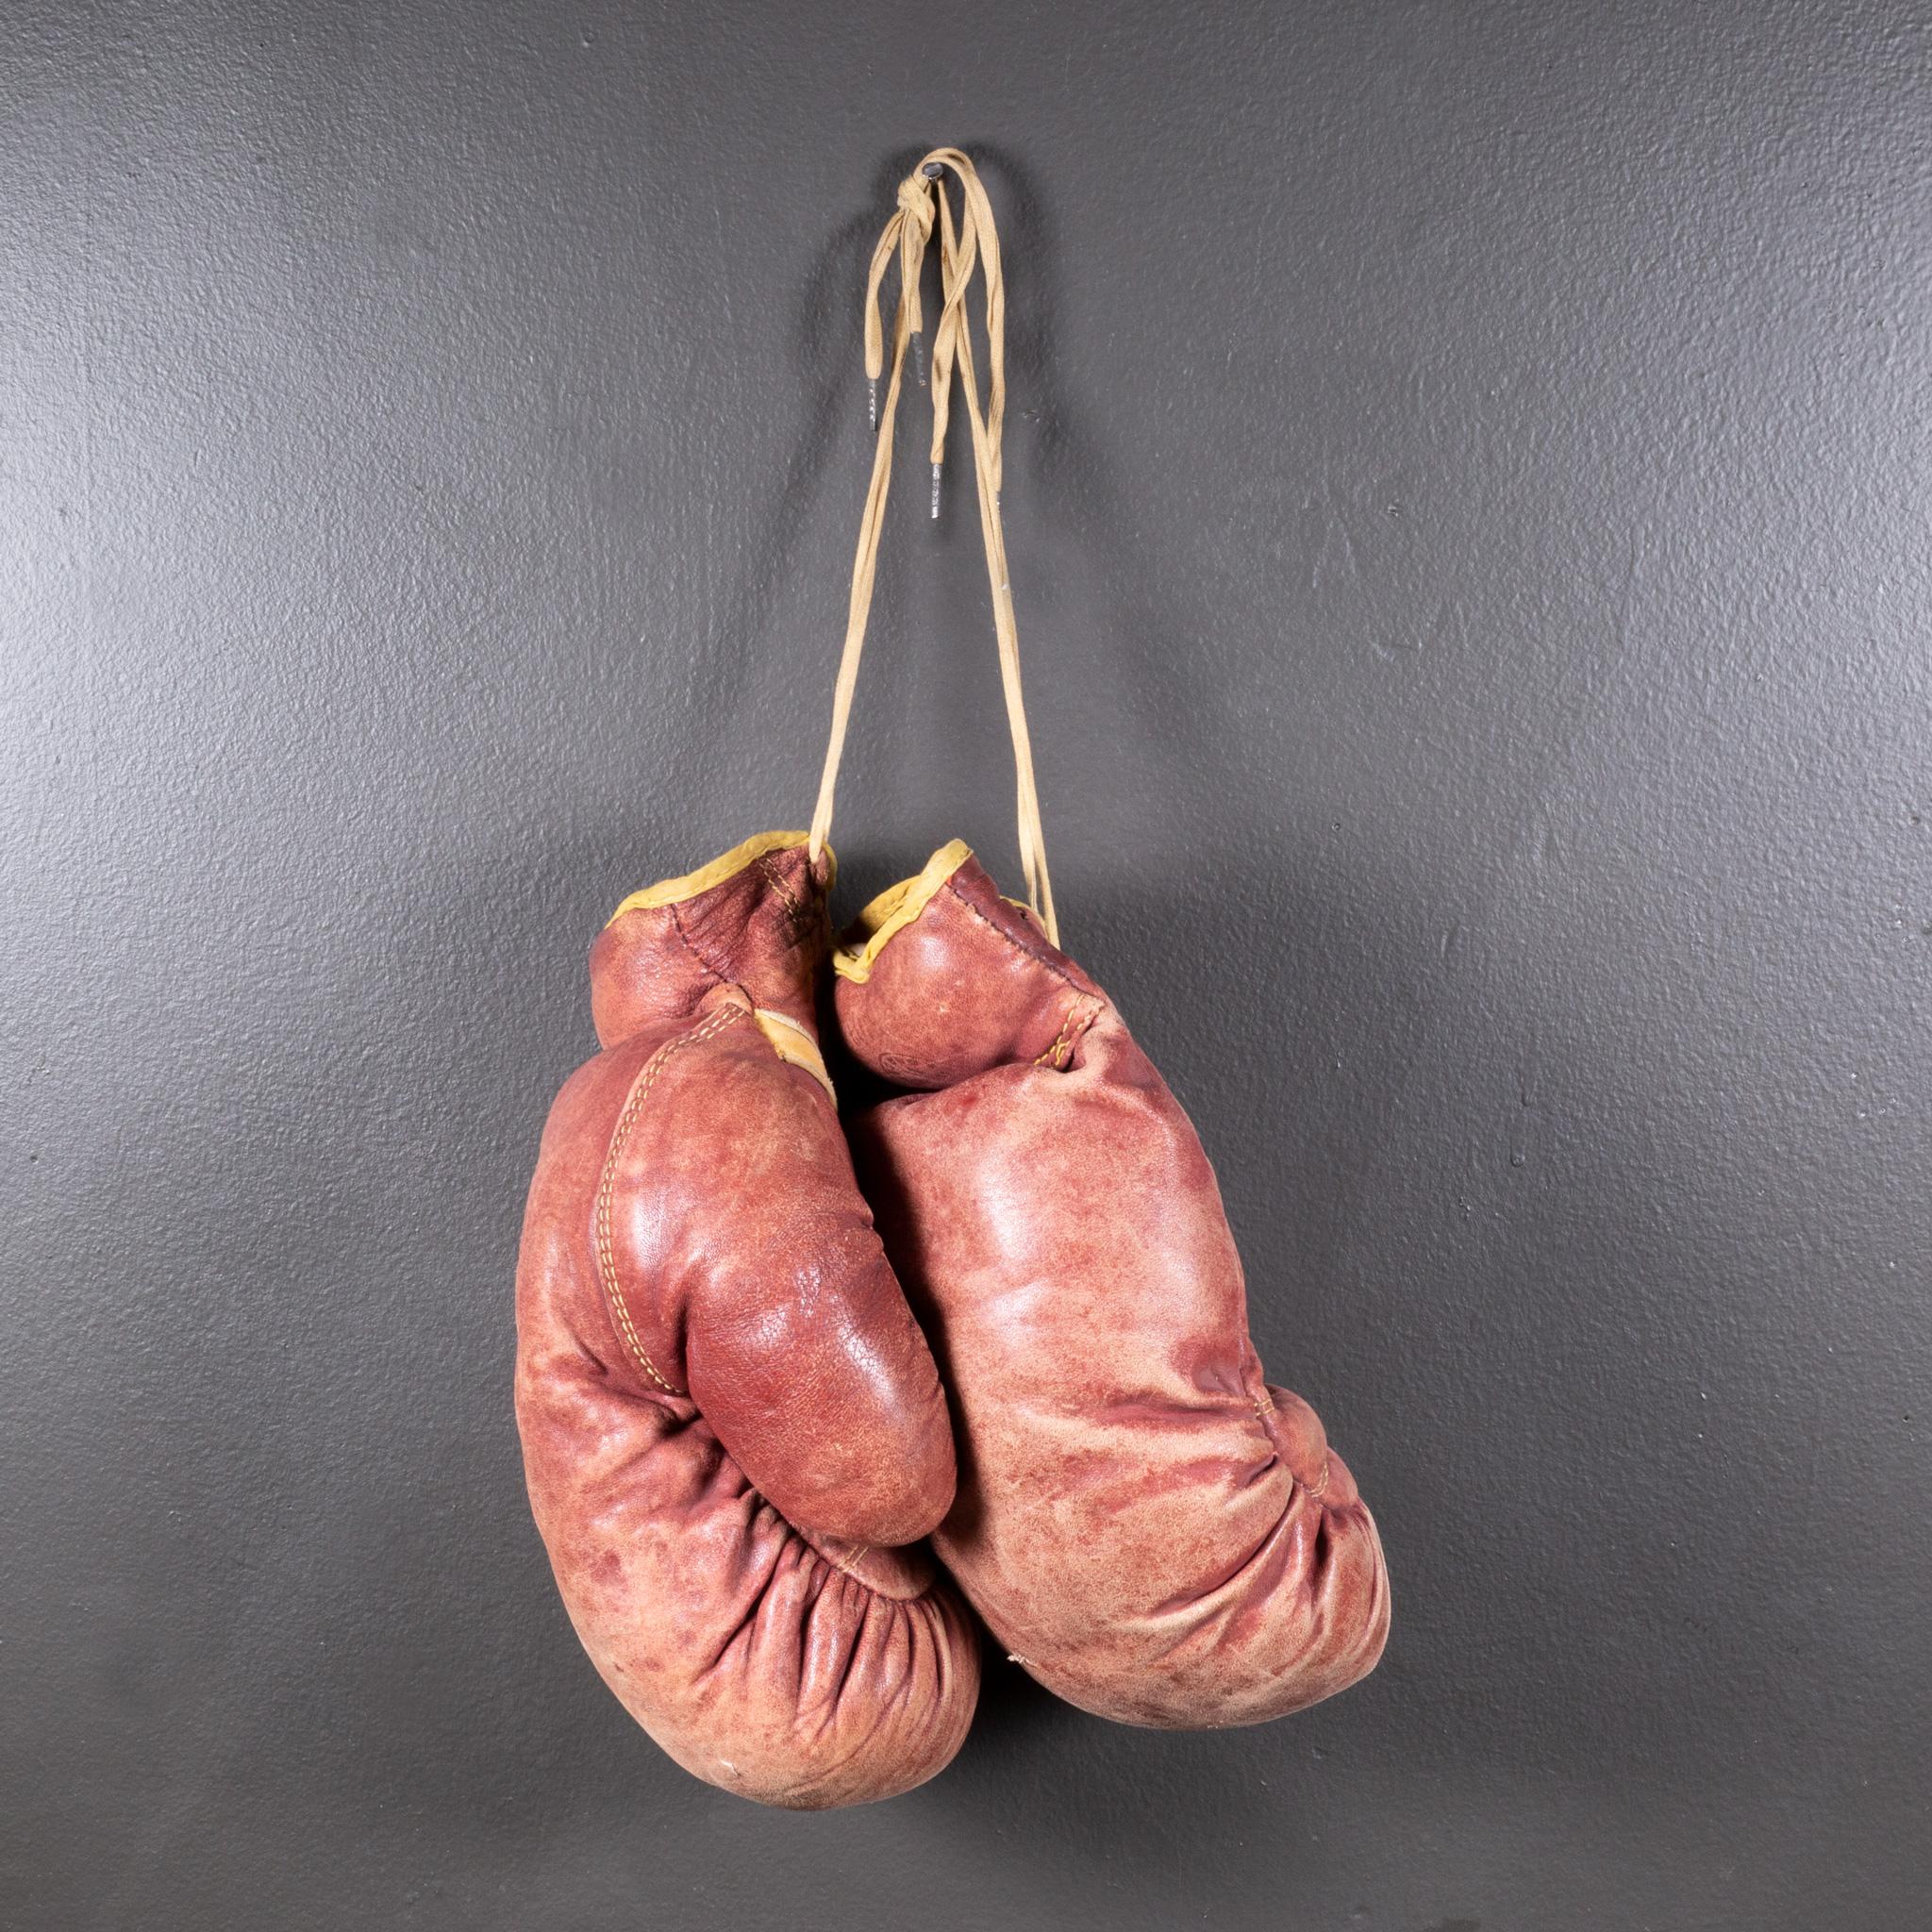 Industrial Vintage Marathon Leather Boxing Gloves c.1950-1960 (FREE SHIPPING) For Sale